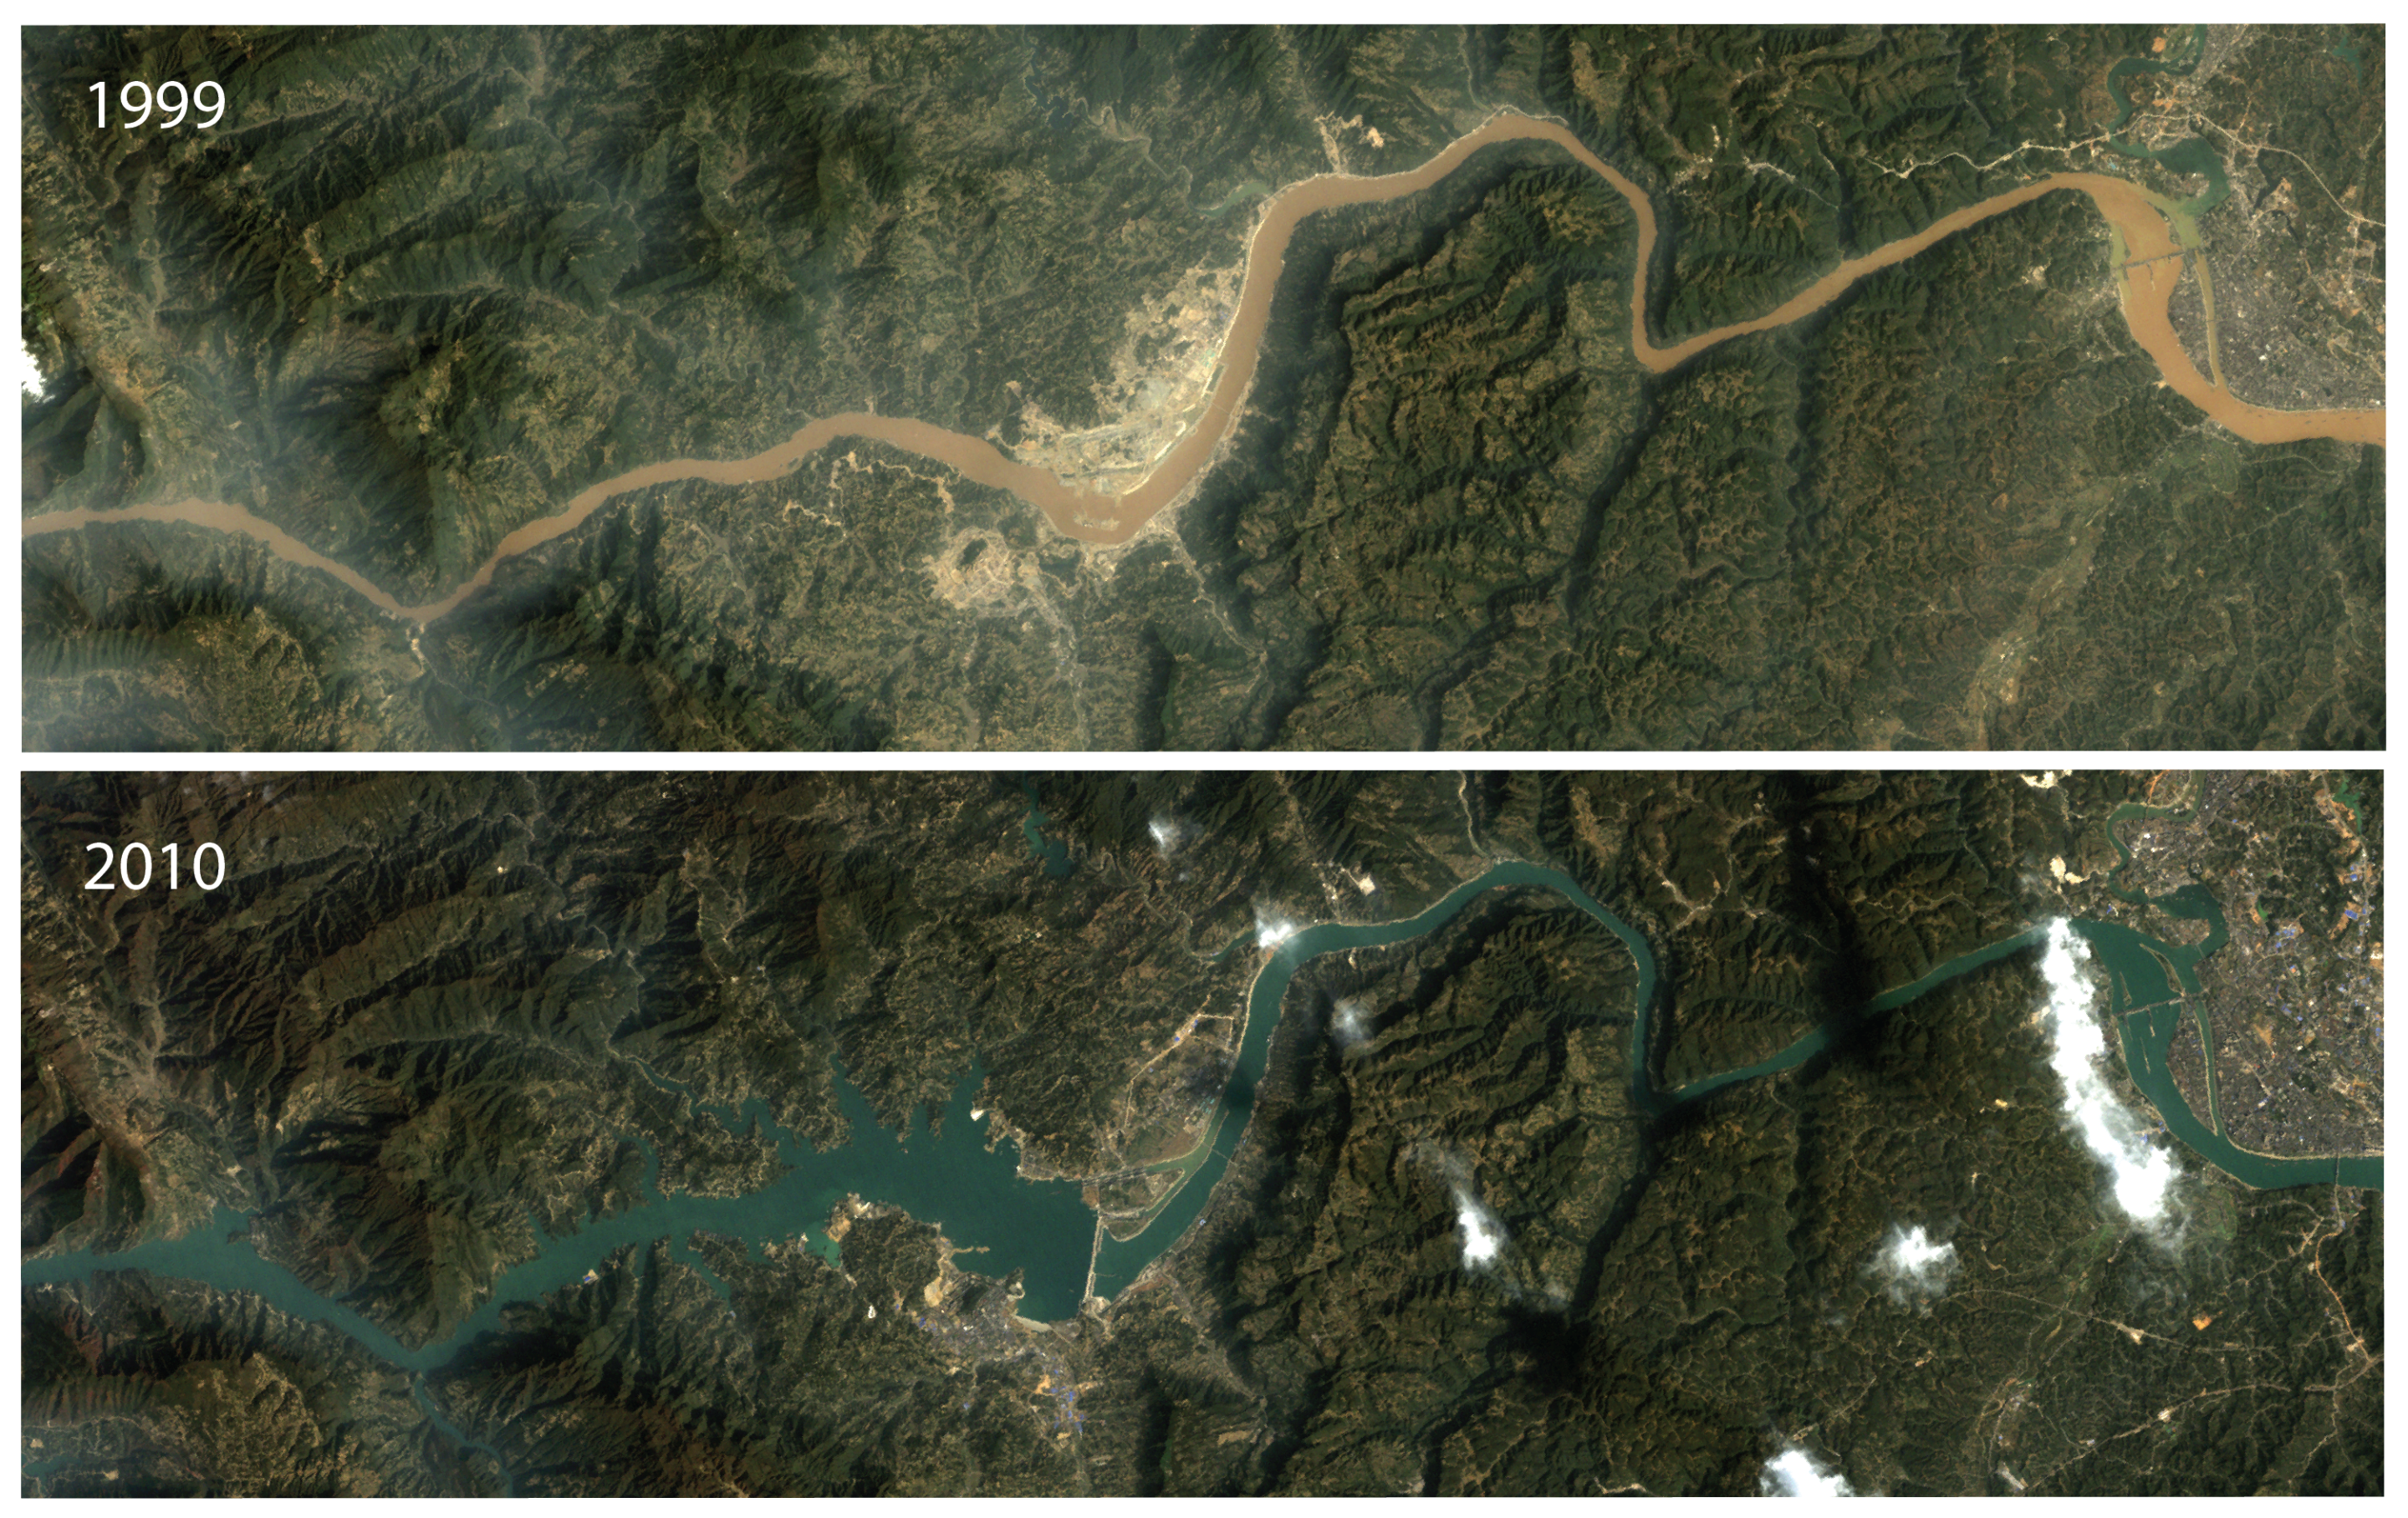 Three Gorges Dam during and after construction